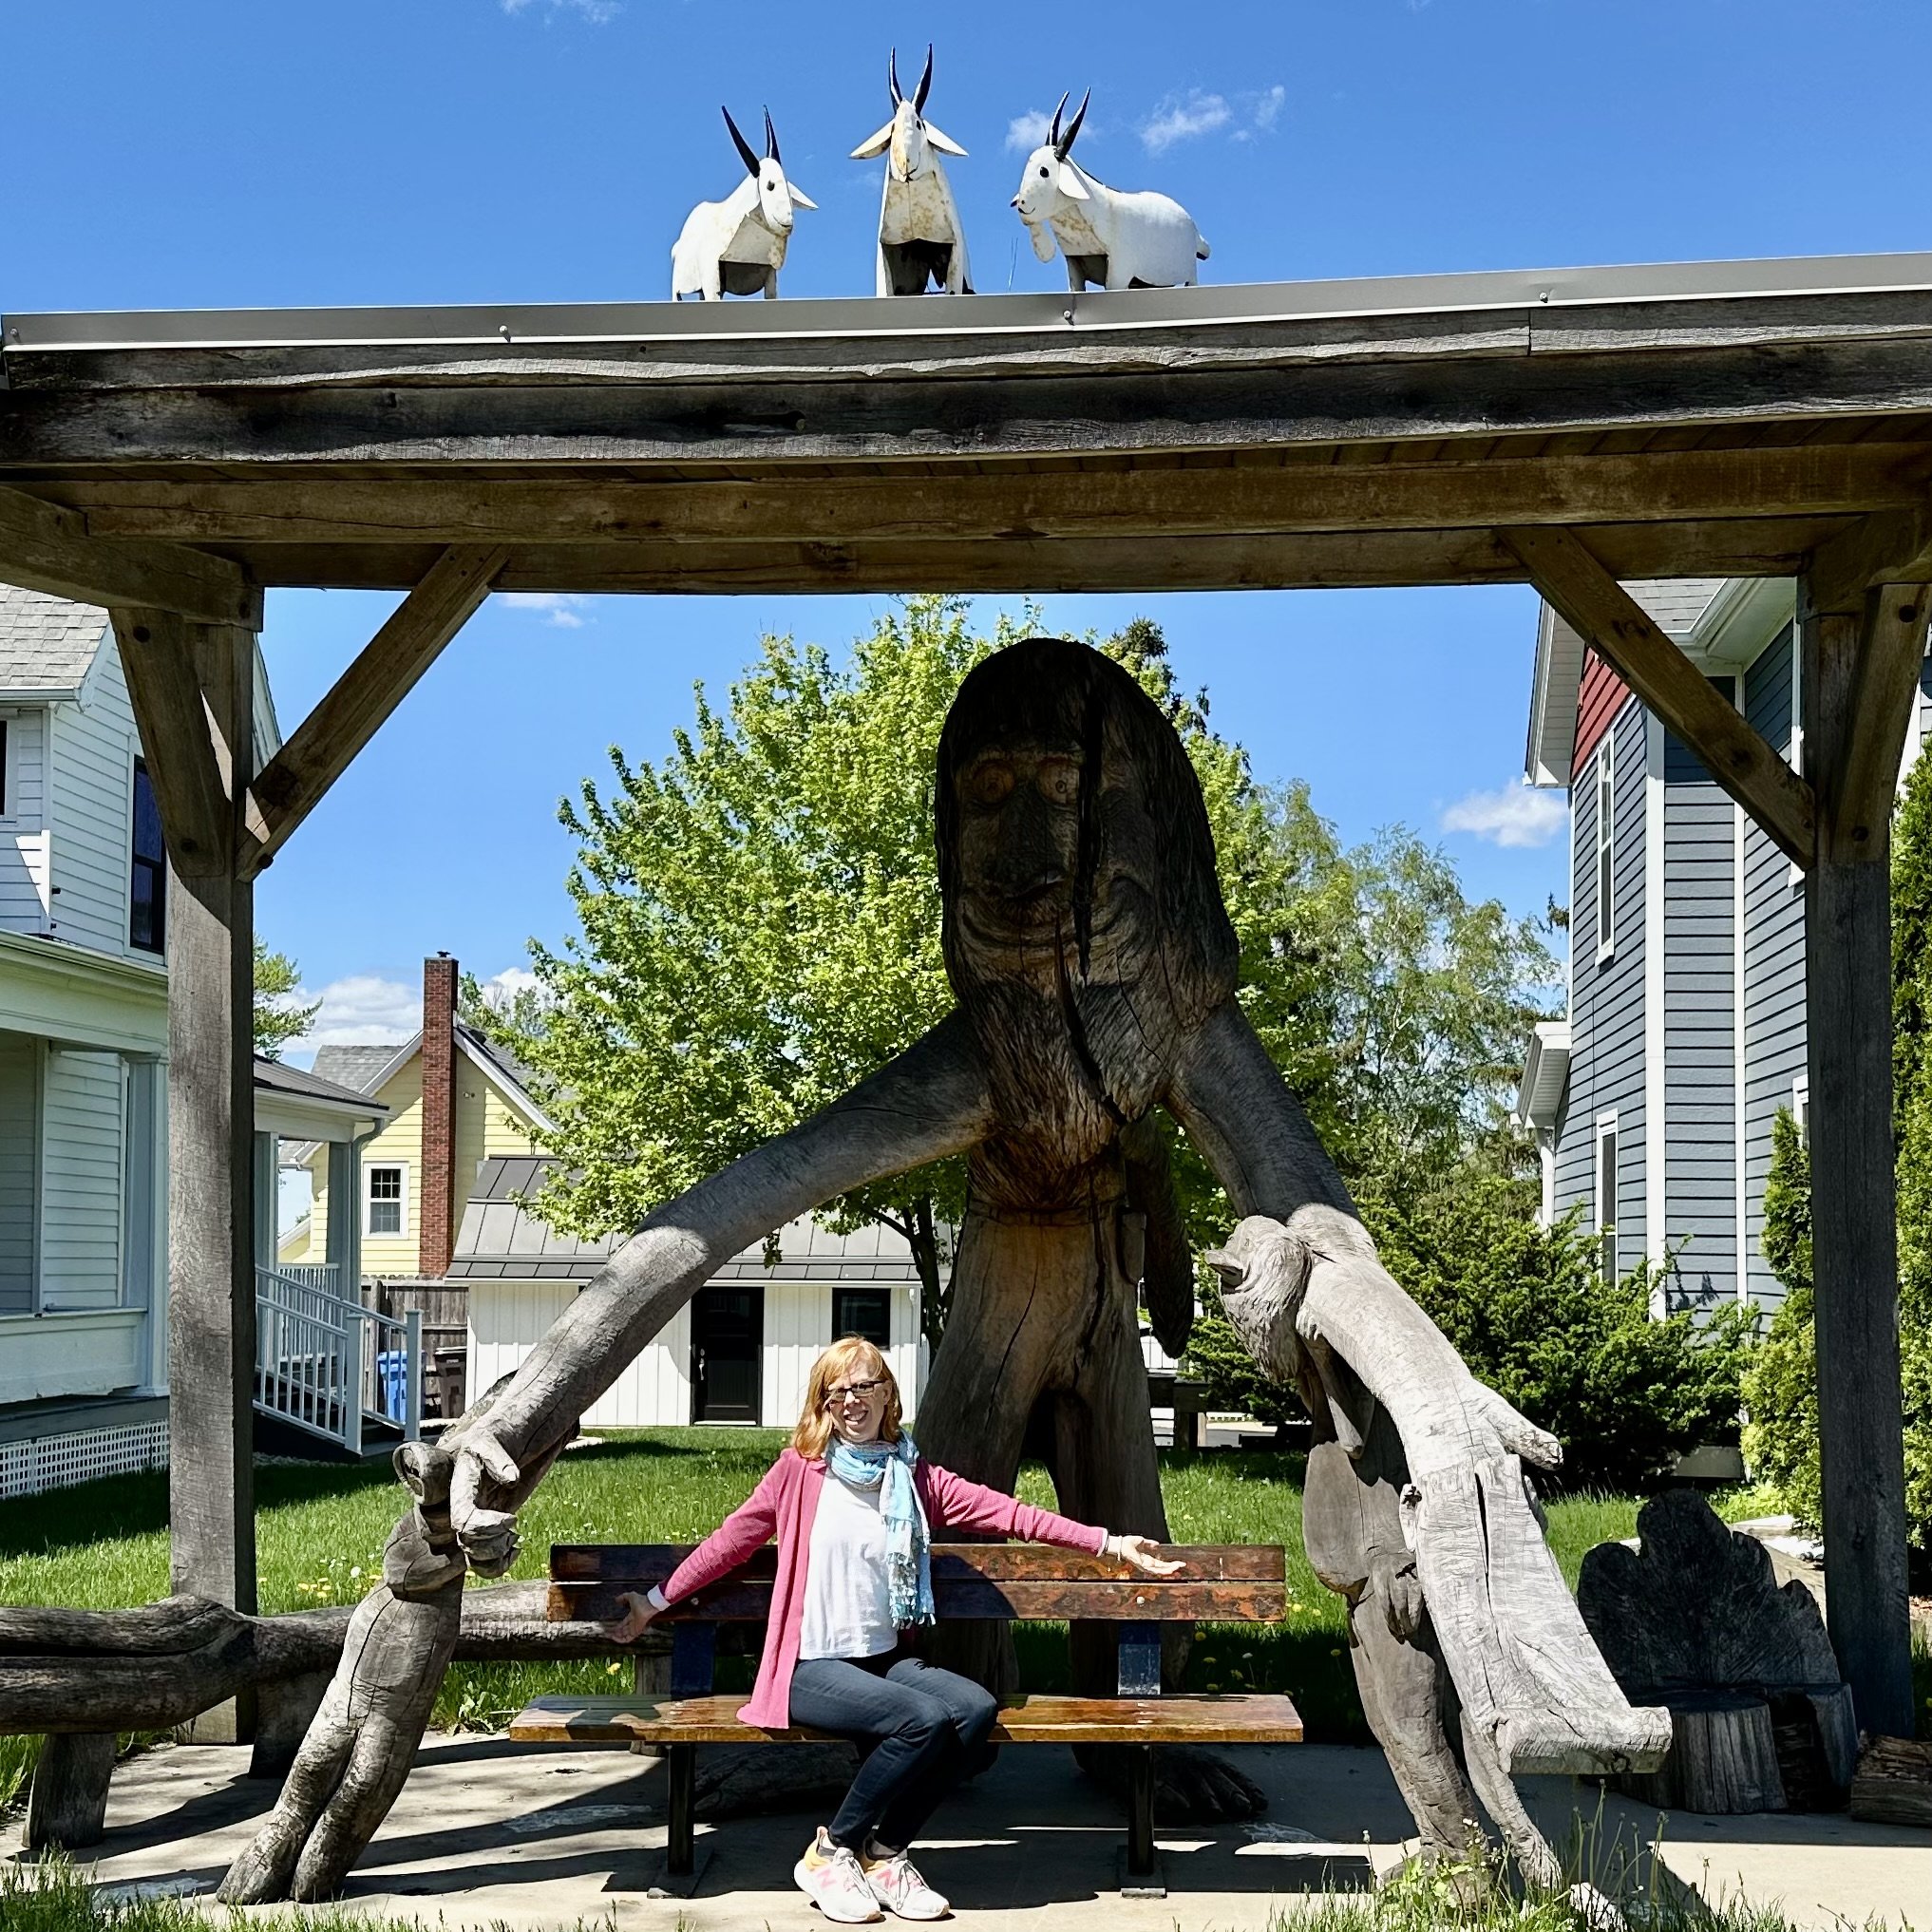 Stumbling upon this whimsical sculpture on my travels reminds me of the endless creativity in the world. Every artist's perspective offers a unique spark of inspiration! 🌍🎨

 #ArtisticJourney #InspiredTravels #mounthoreb #trollunderbridge